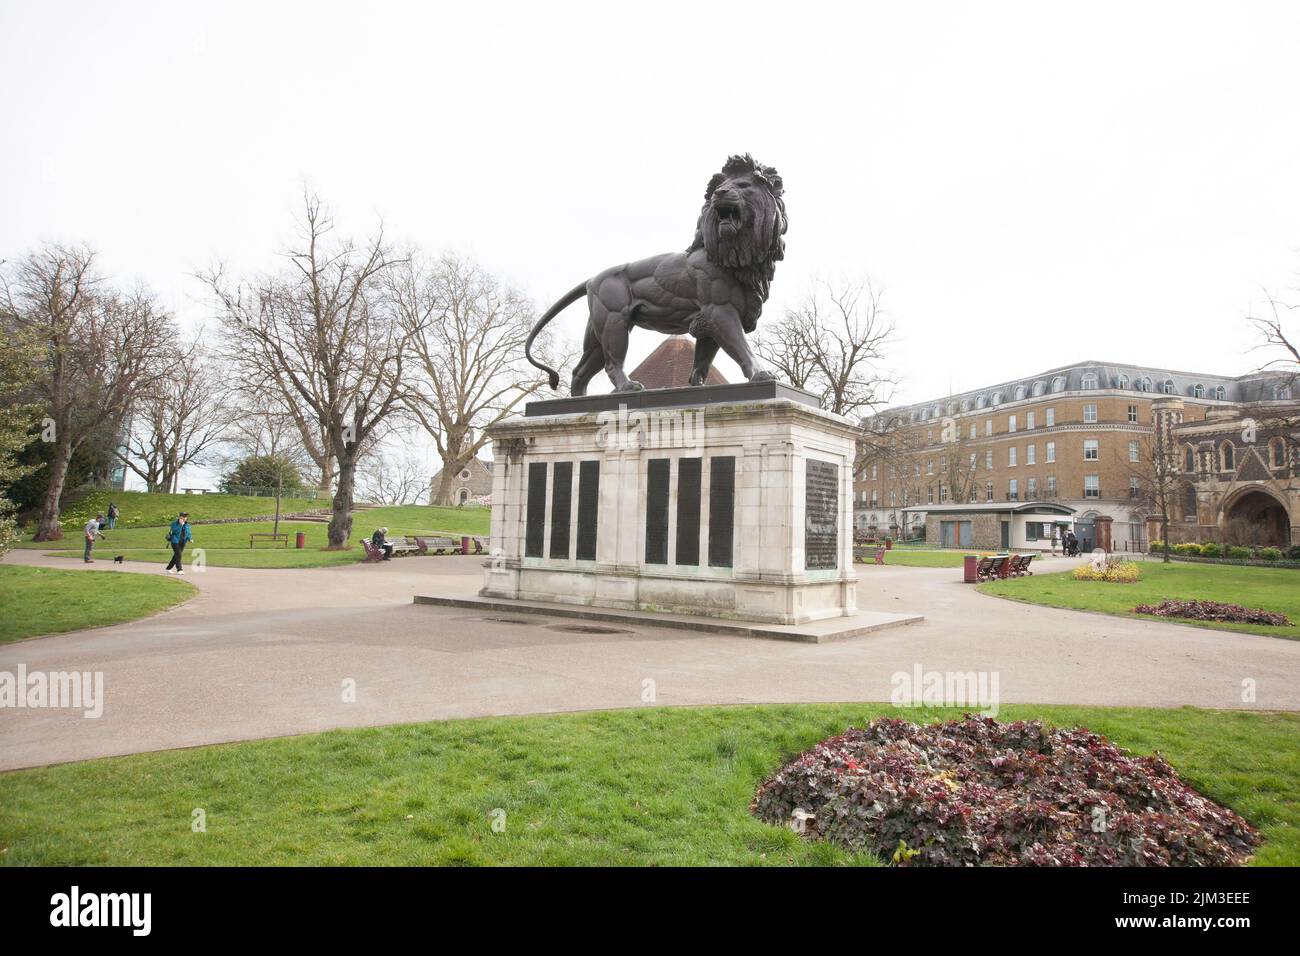 The Maiwand Lion, War Memorial in Forbury Gardens, Reading, Berkshire in the UK Stock Photo